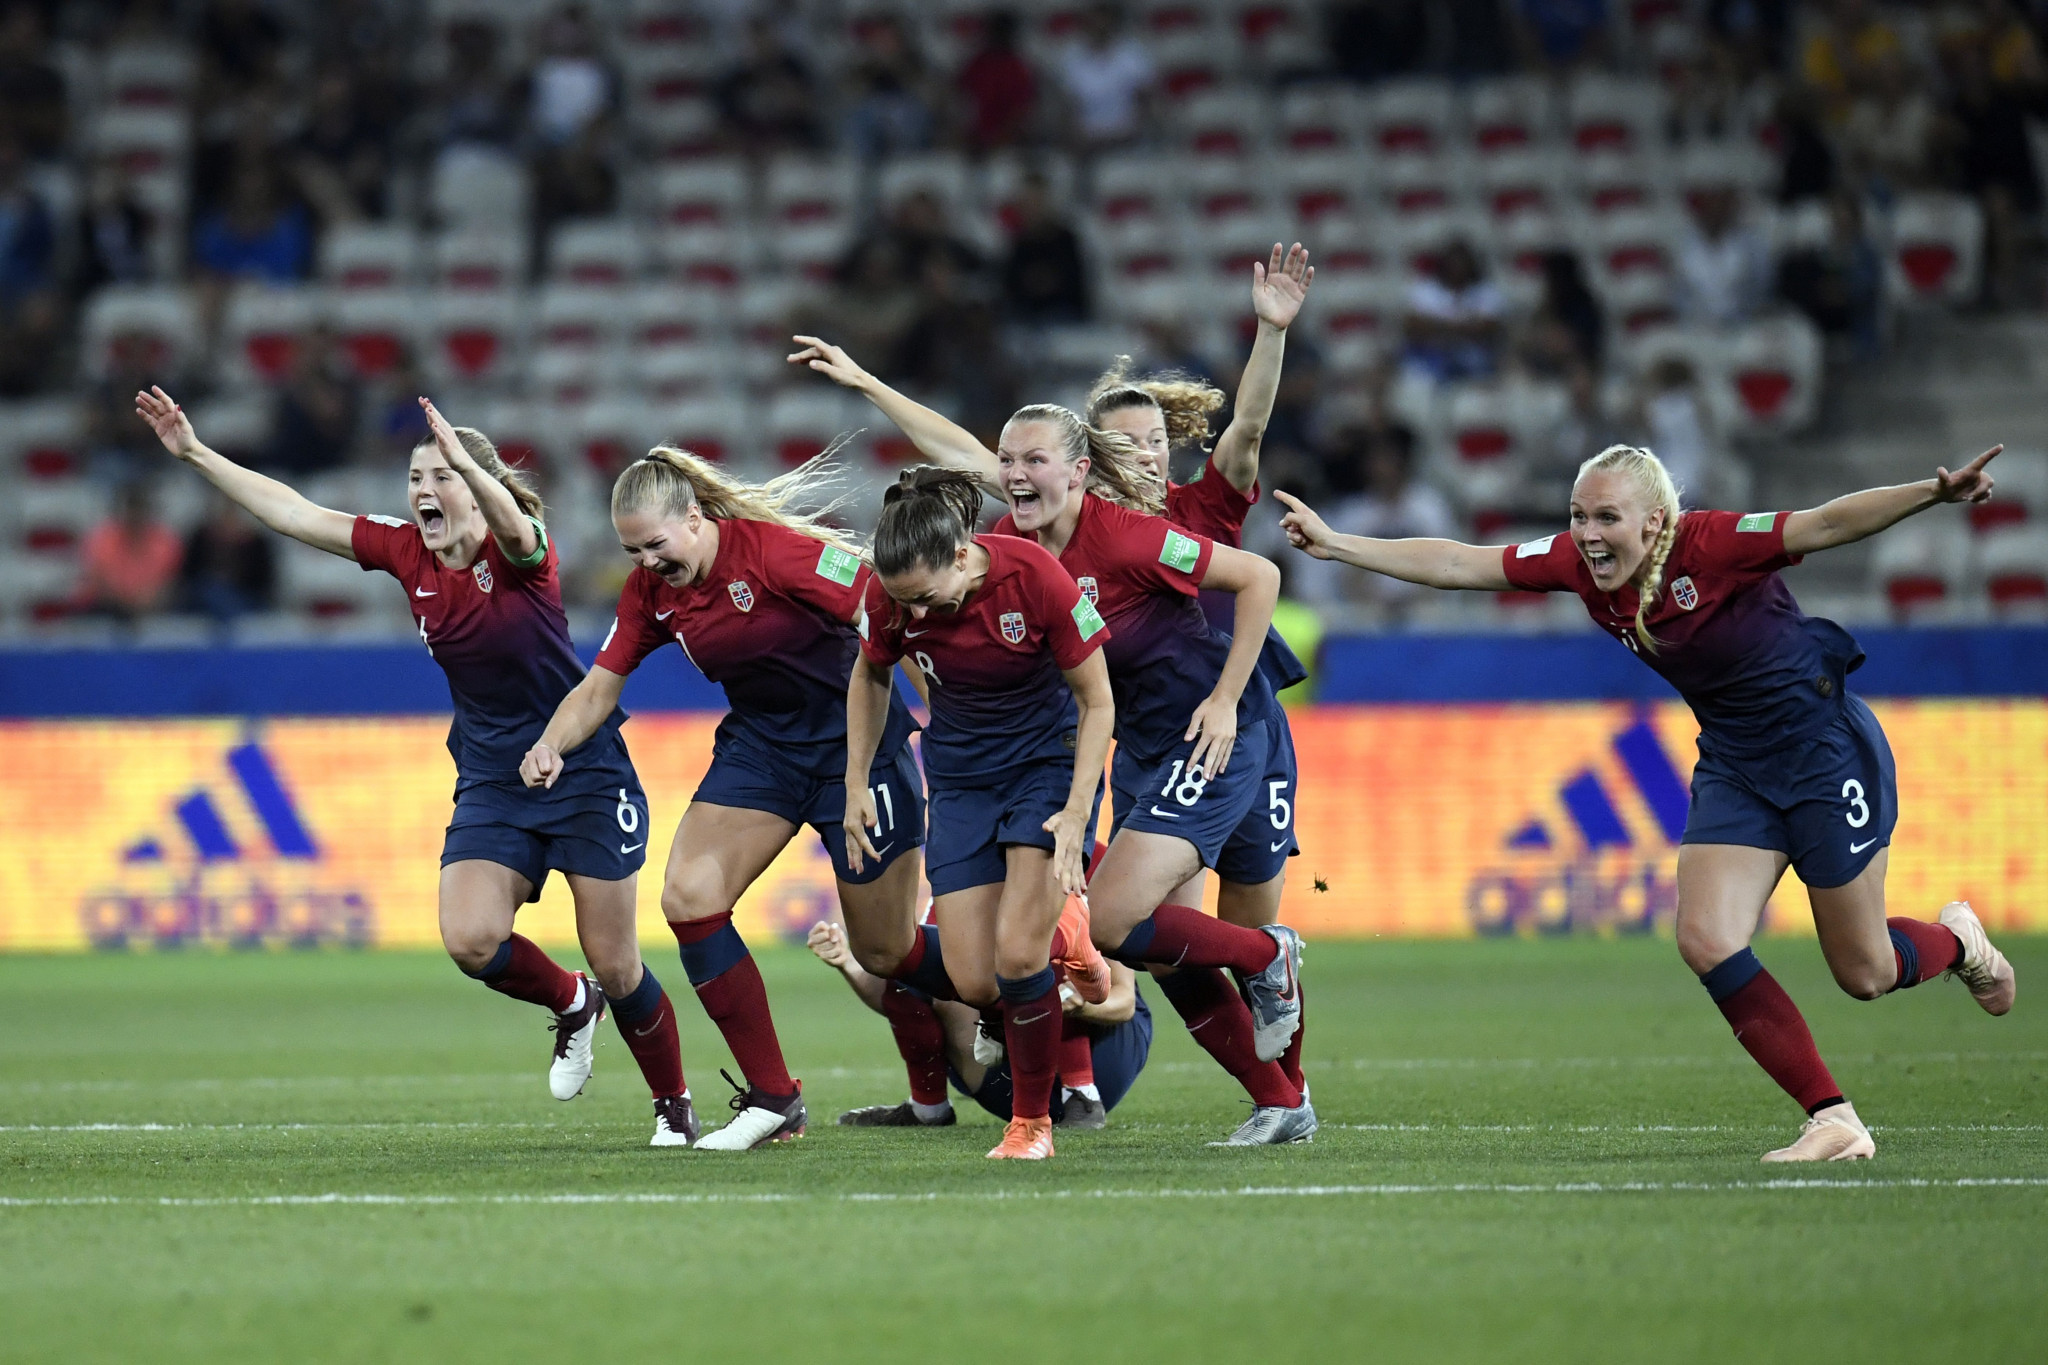 Despite criticism over low attendances and poor organisation, FIFA say the 2019 Women's World Cup broke records for engagement over the group stage ©Getty Images